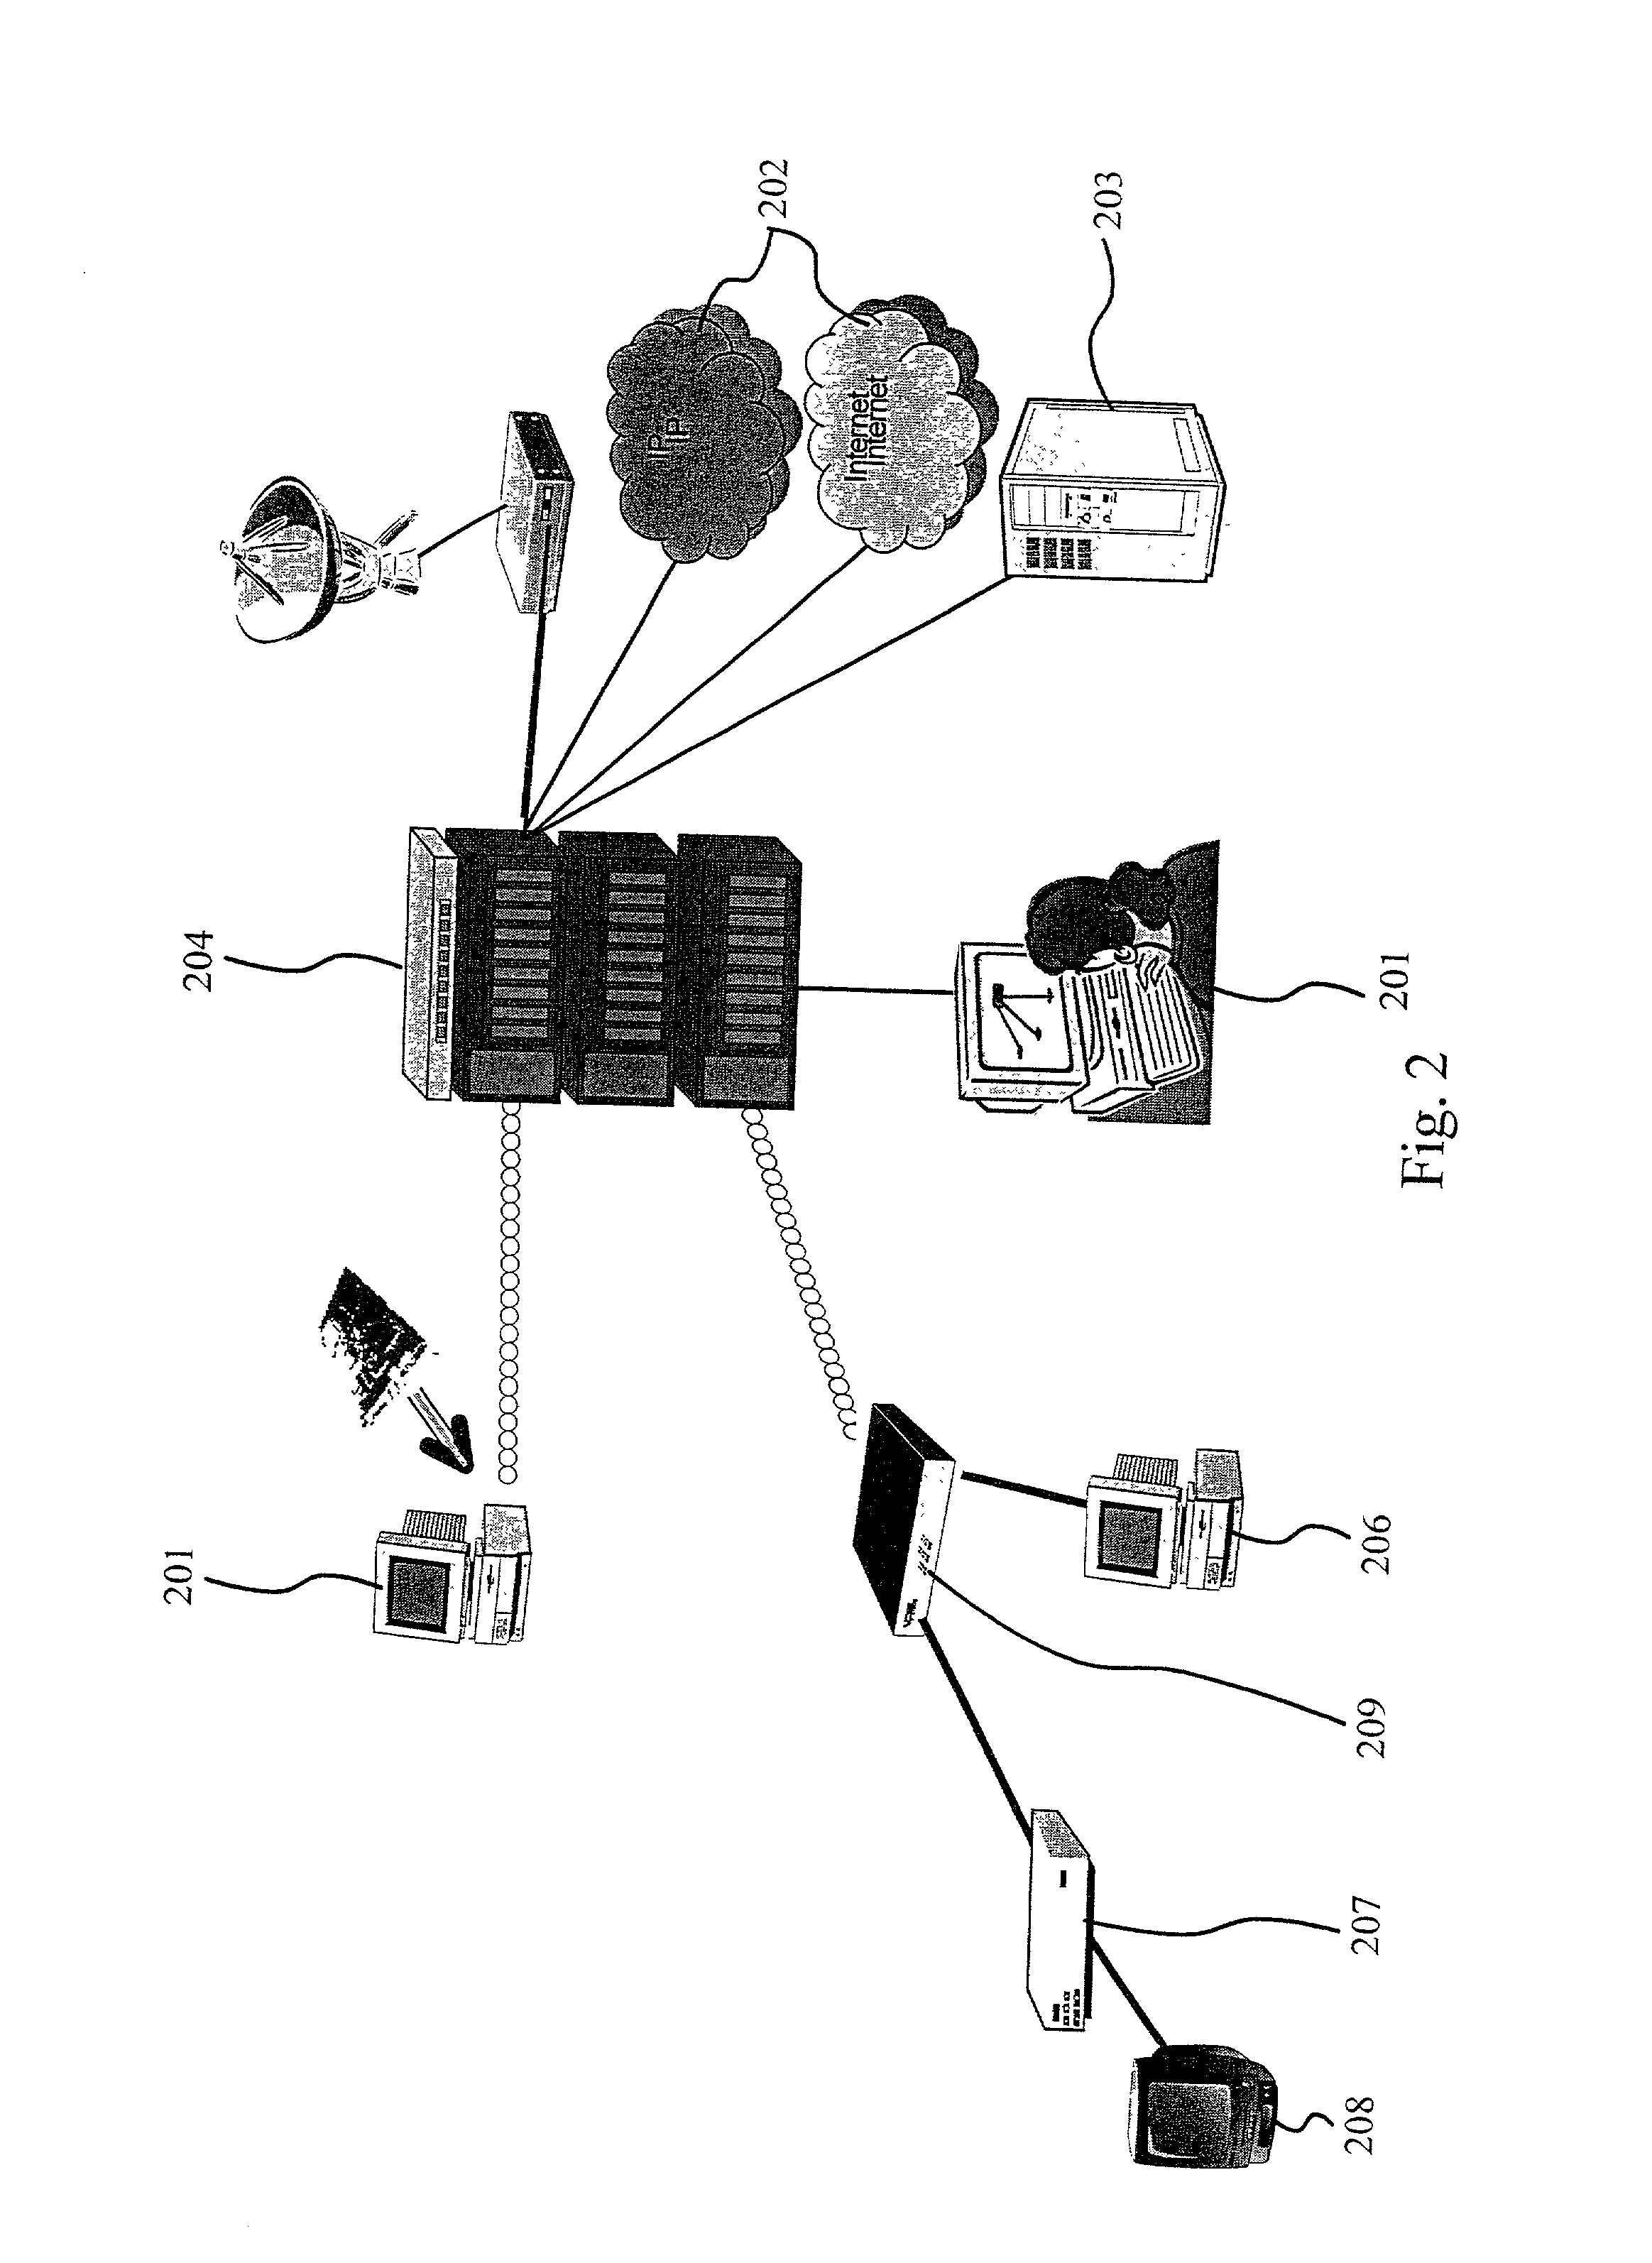 Method and apparatus for adjusting digital filters in a DSL modem